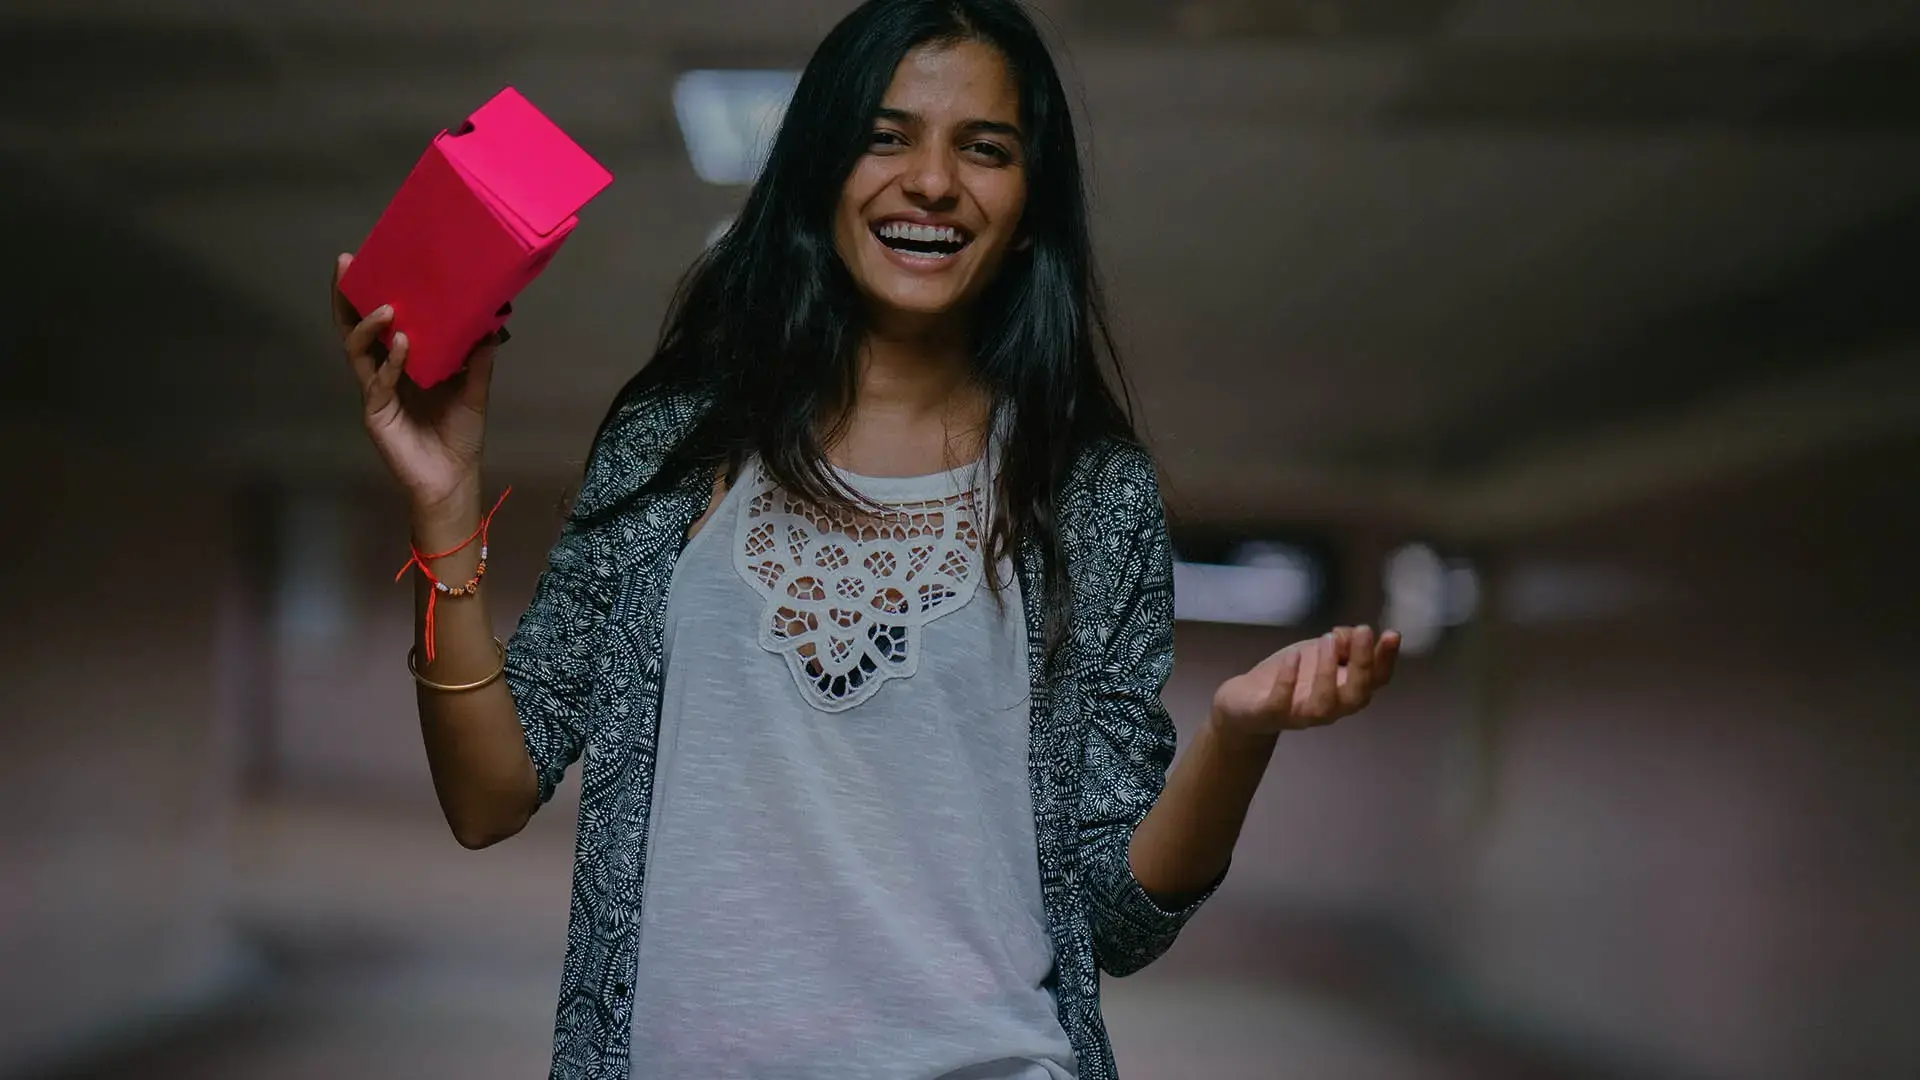 Smiling woman holding a box.